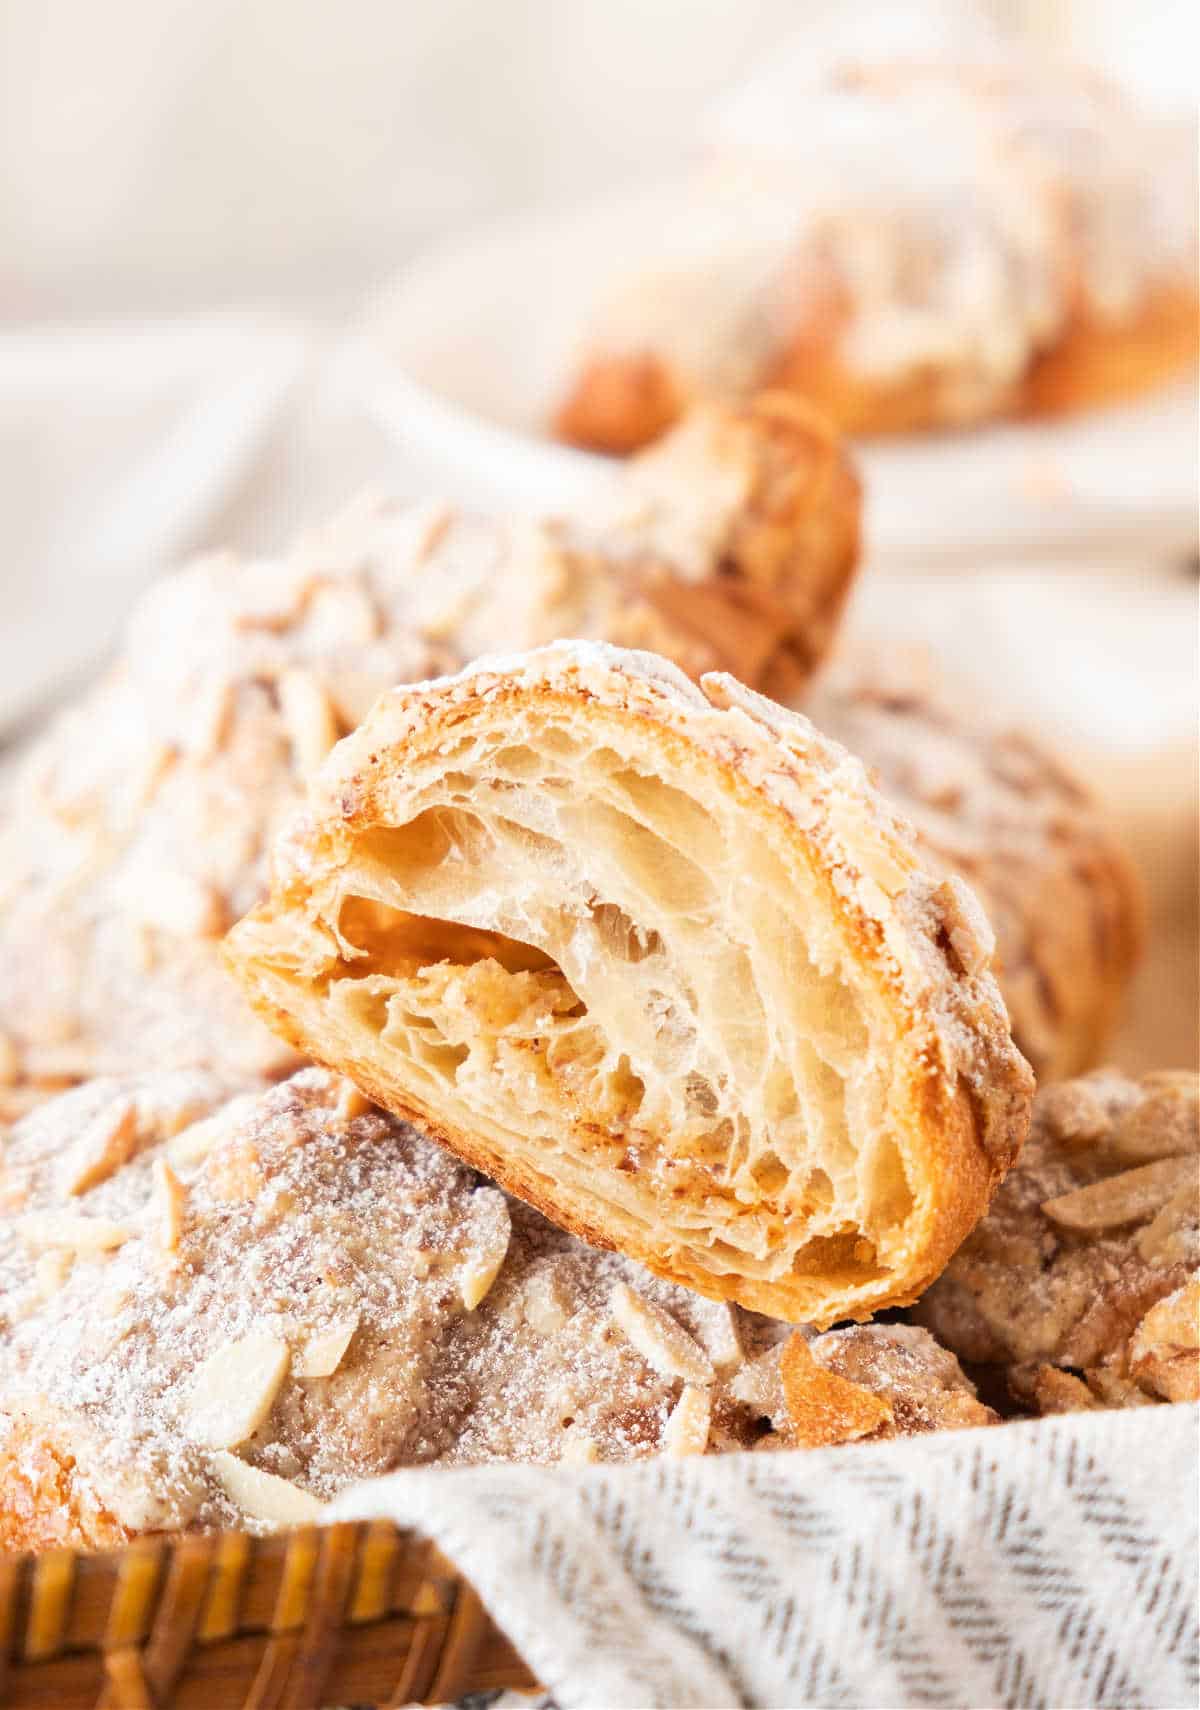 Half almond croissant on a pile of whole ones. Striped cloth, greyish white background. 